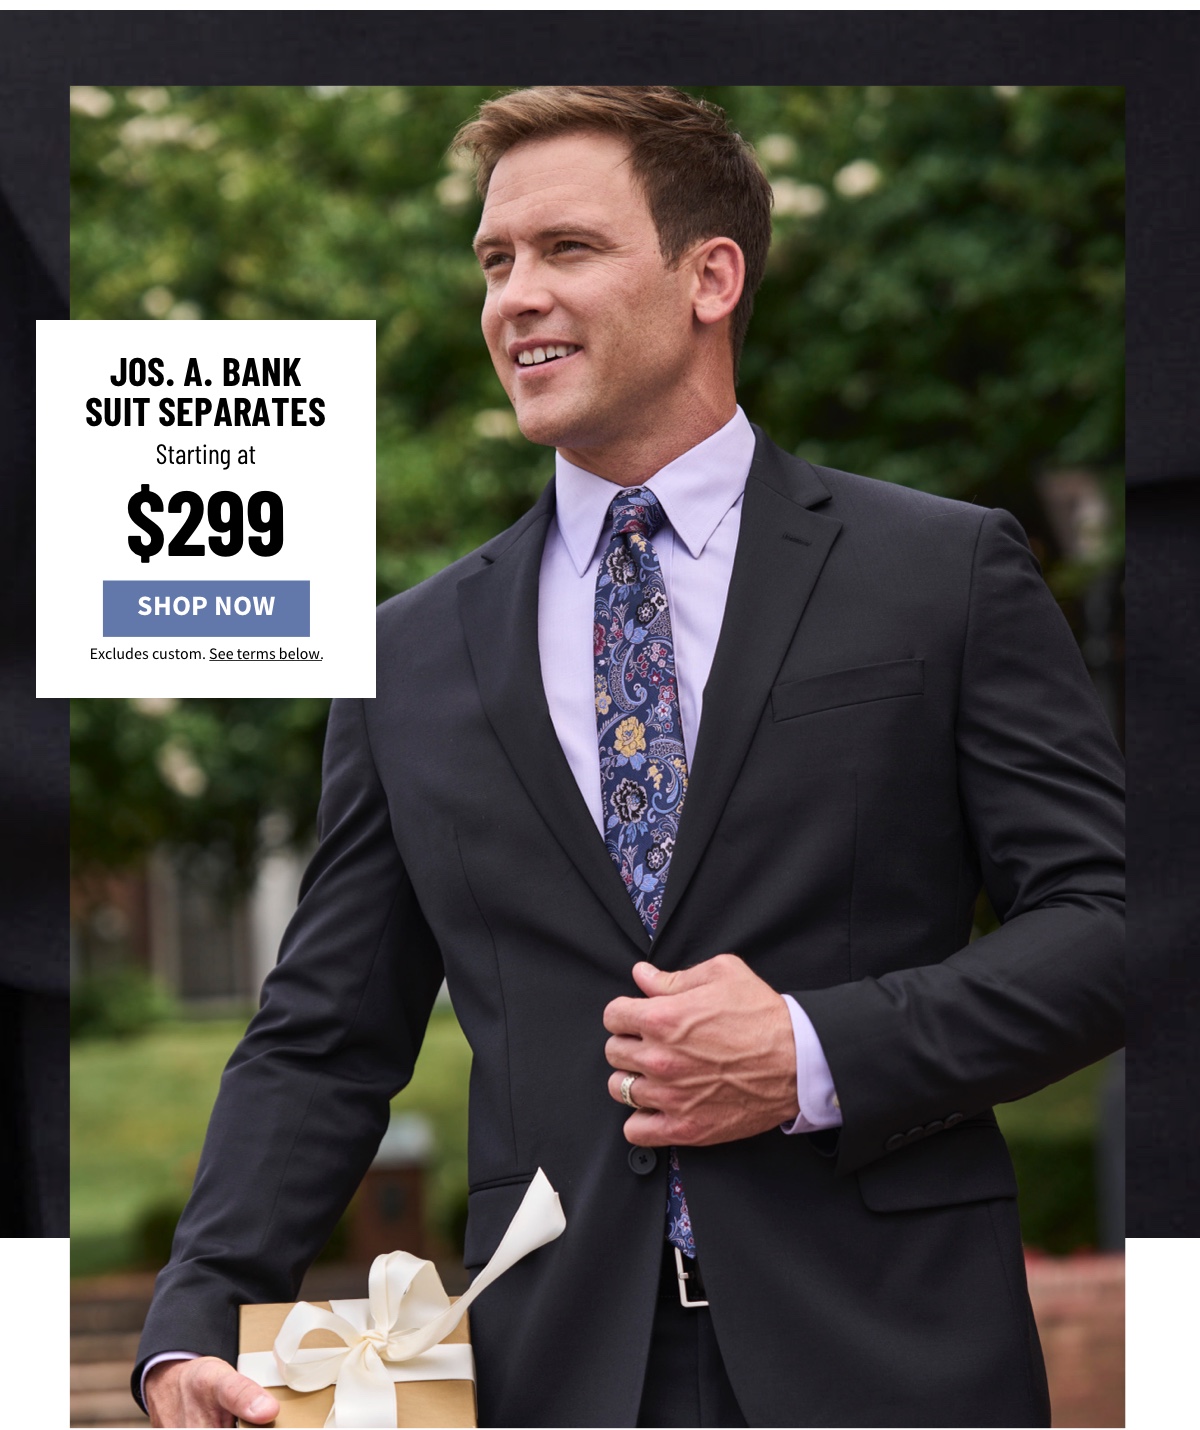 Jos. A. Bank Suit Separates Starting at $299 Shop Now Excludes custom. See terms below.